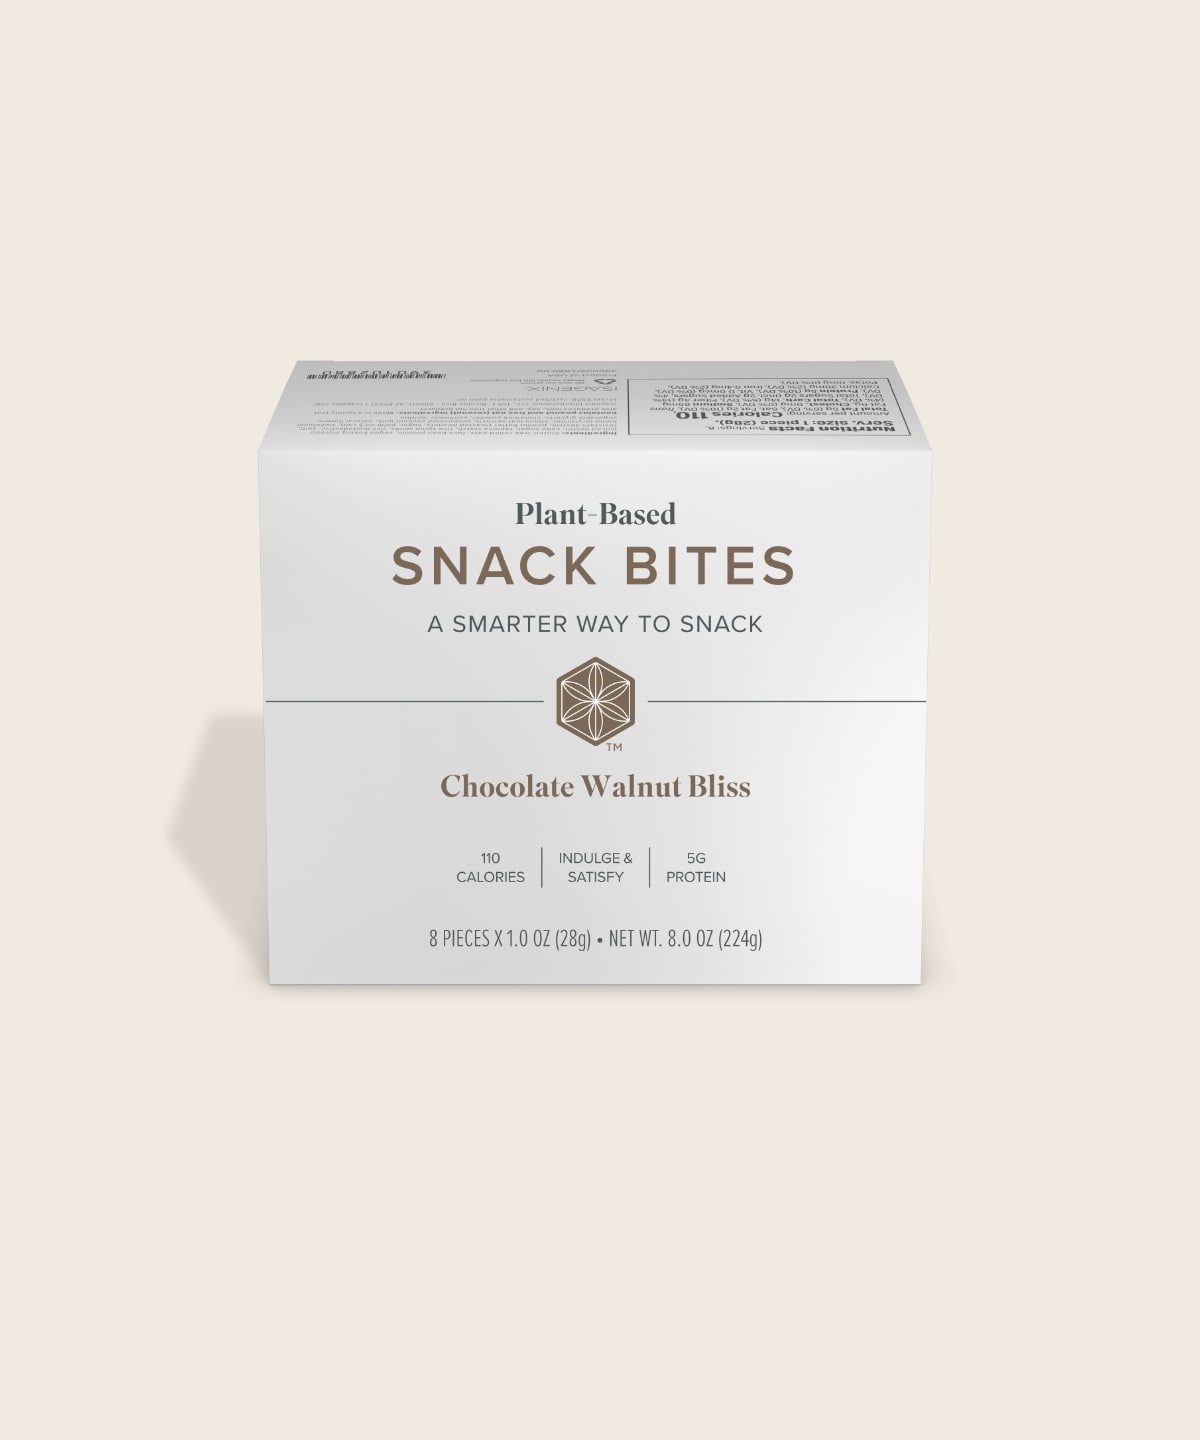 Snack Bites – Limited-Edition Chocolate Walnut Bliss